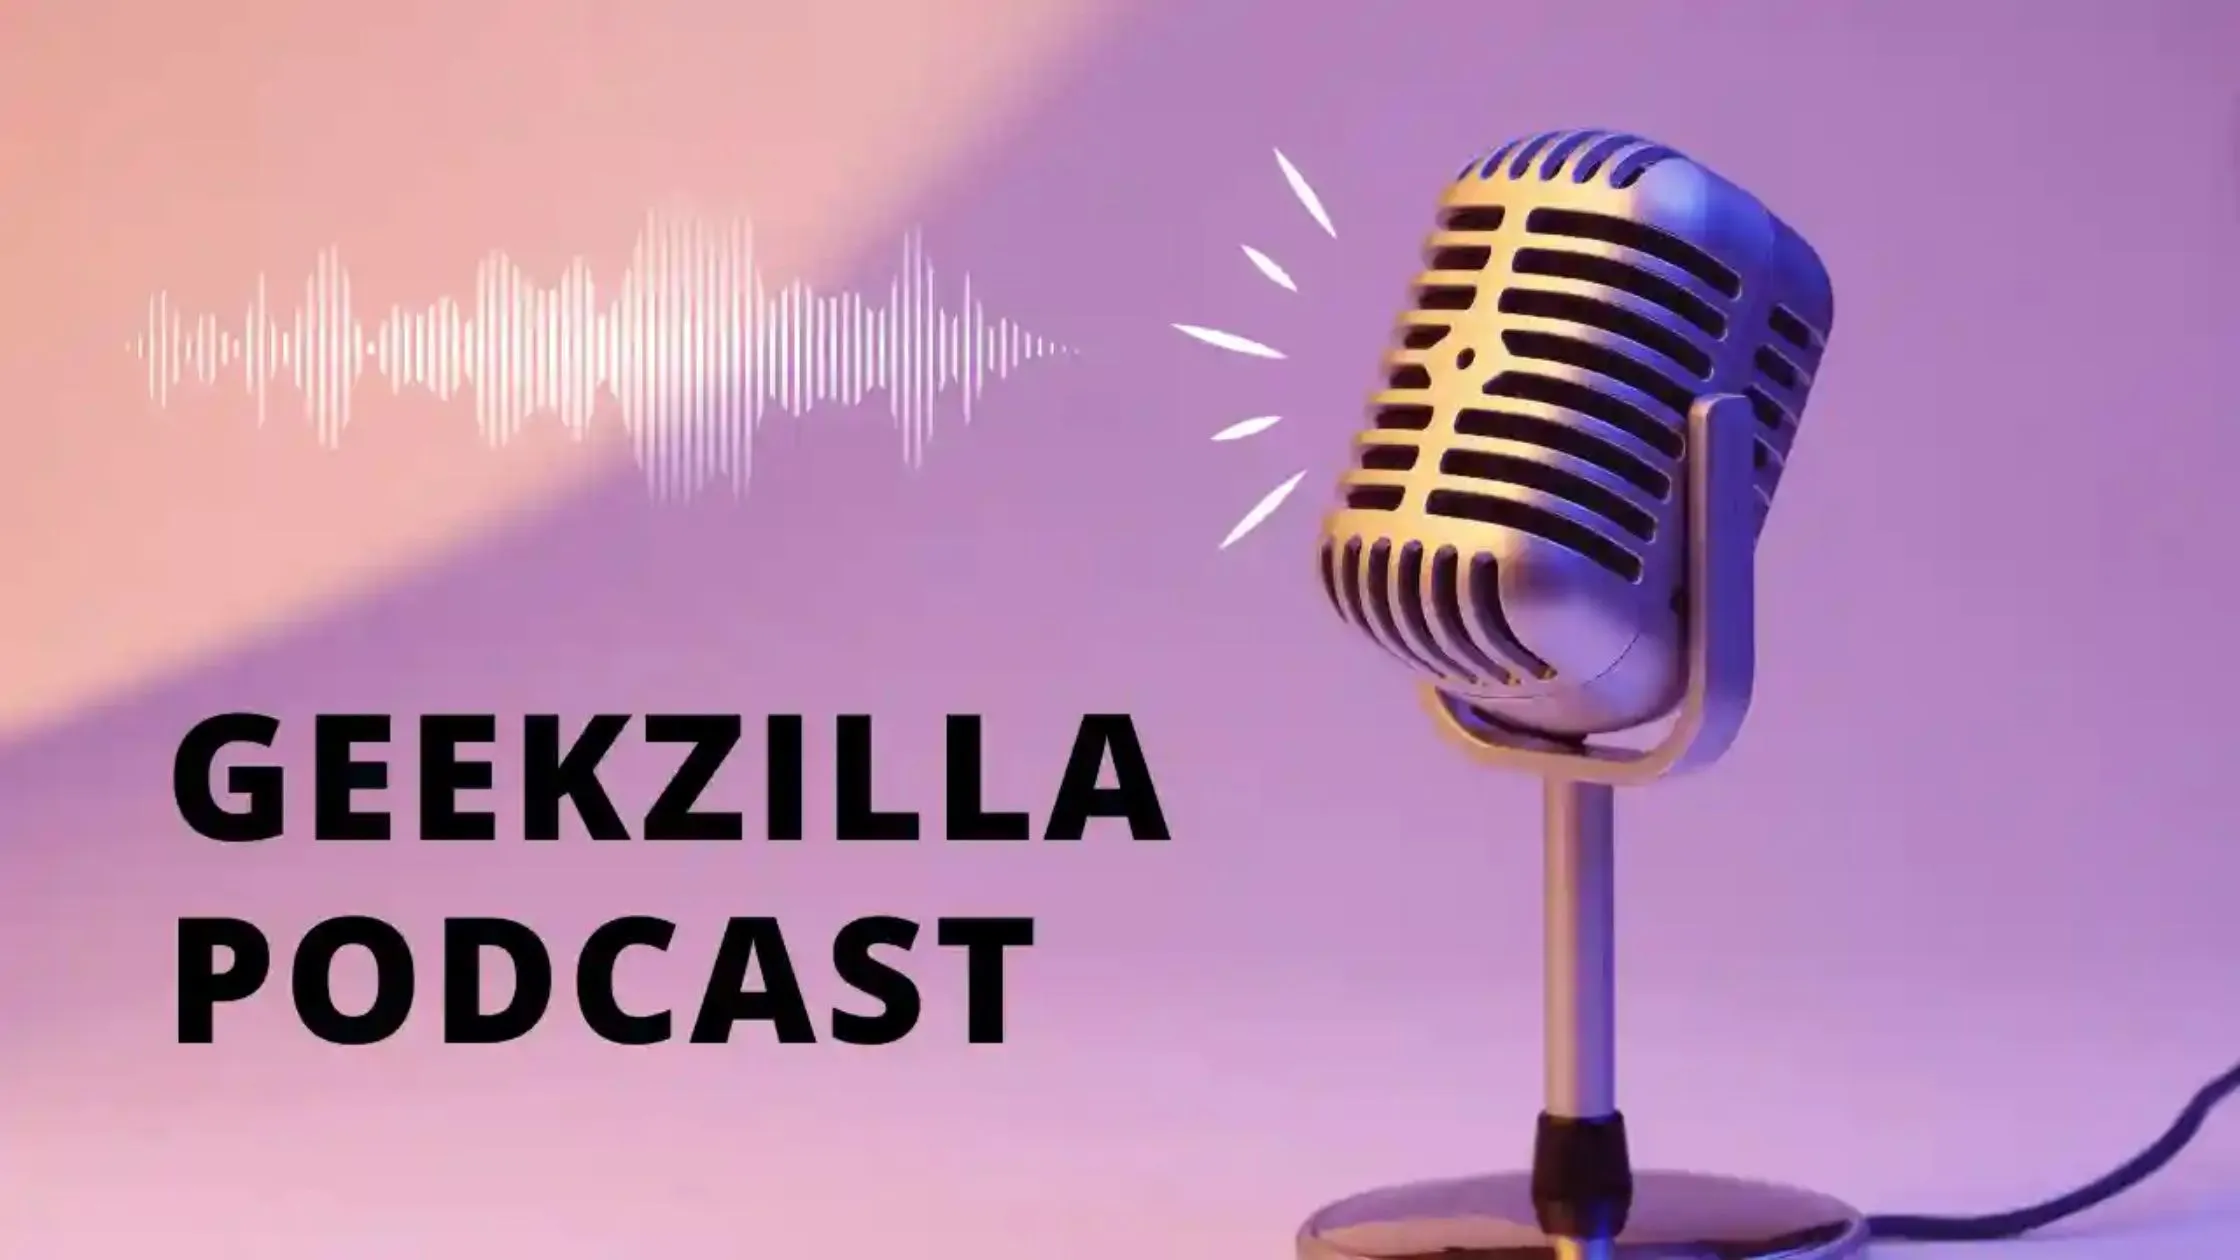 What Is Geekzilla Podcast?